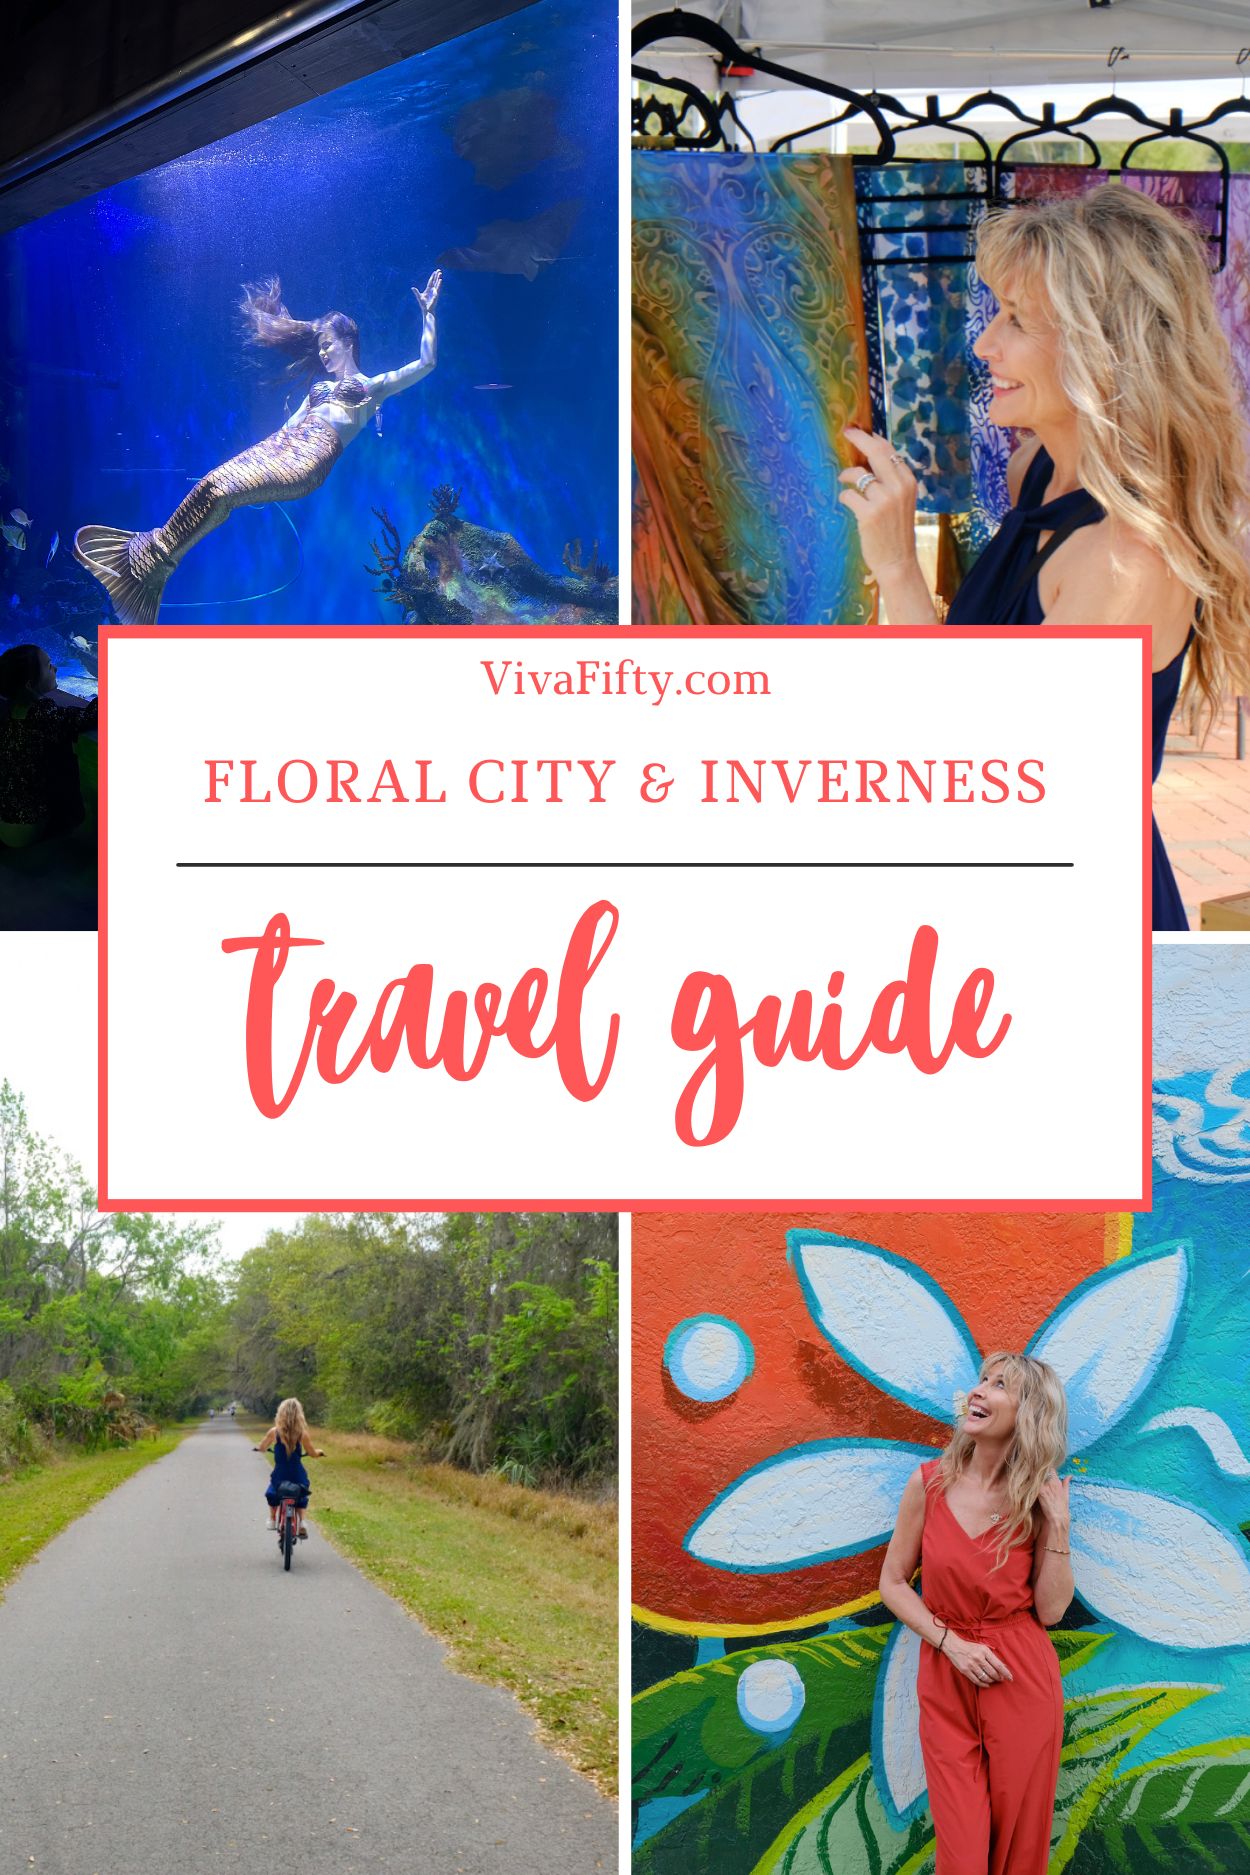 If you haven’t yet been to Inverness and Floral City, in Citrus County, we’ve picked some activities and places to visit for you.